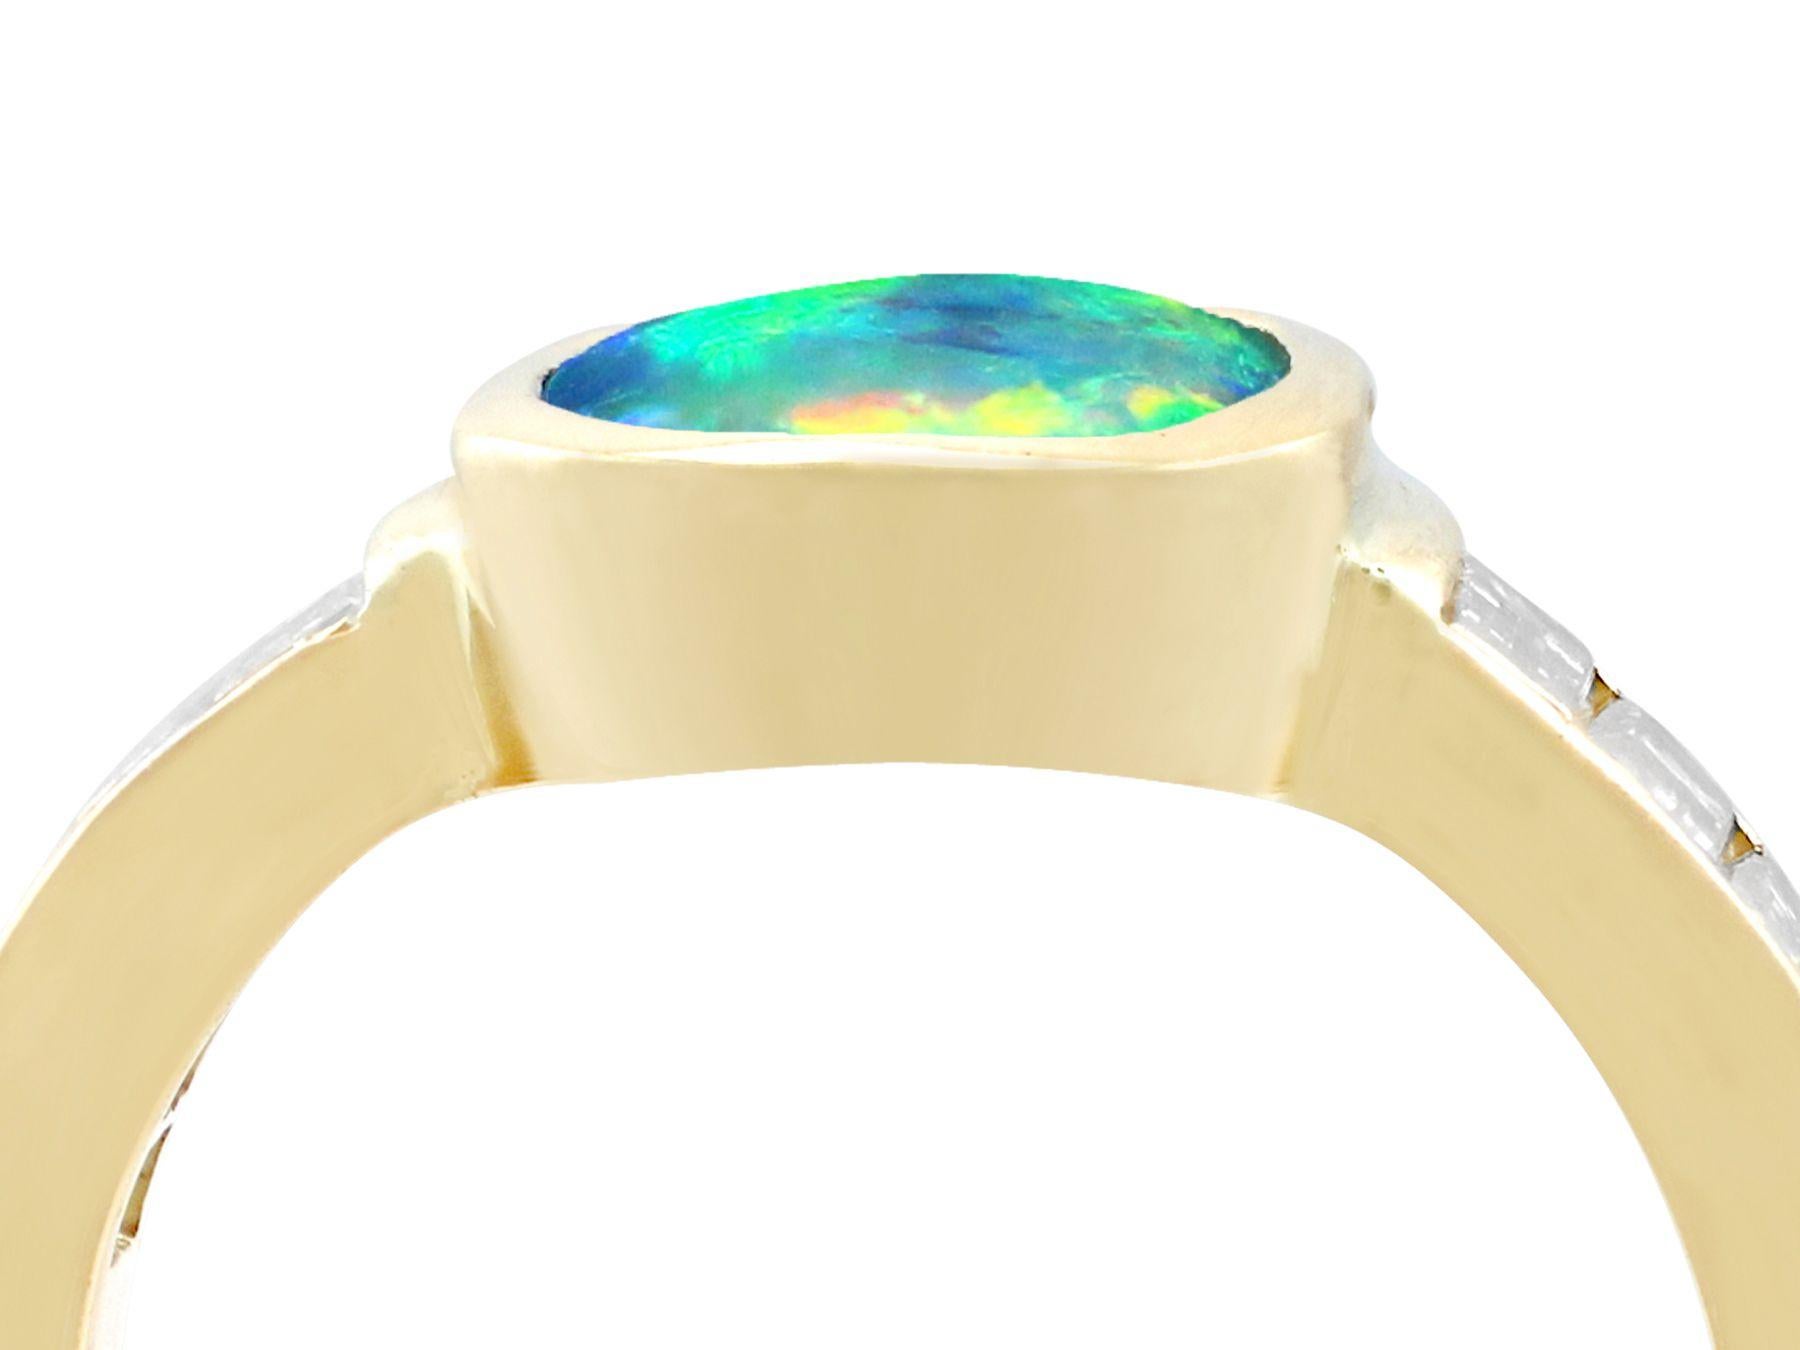 A stunning vintage French 1.40 carat opal and 1.12 carat diamond, 18 karat yellow gold dress ring; part of our diverse vintage jewelry collections.

This stunning, fine and impressive cabochon cut opal and diamond gold ring has been crafted in 18k